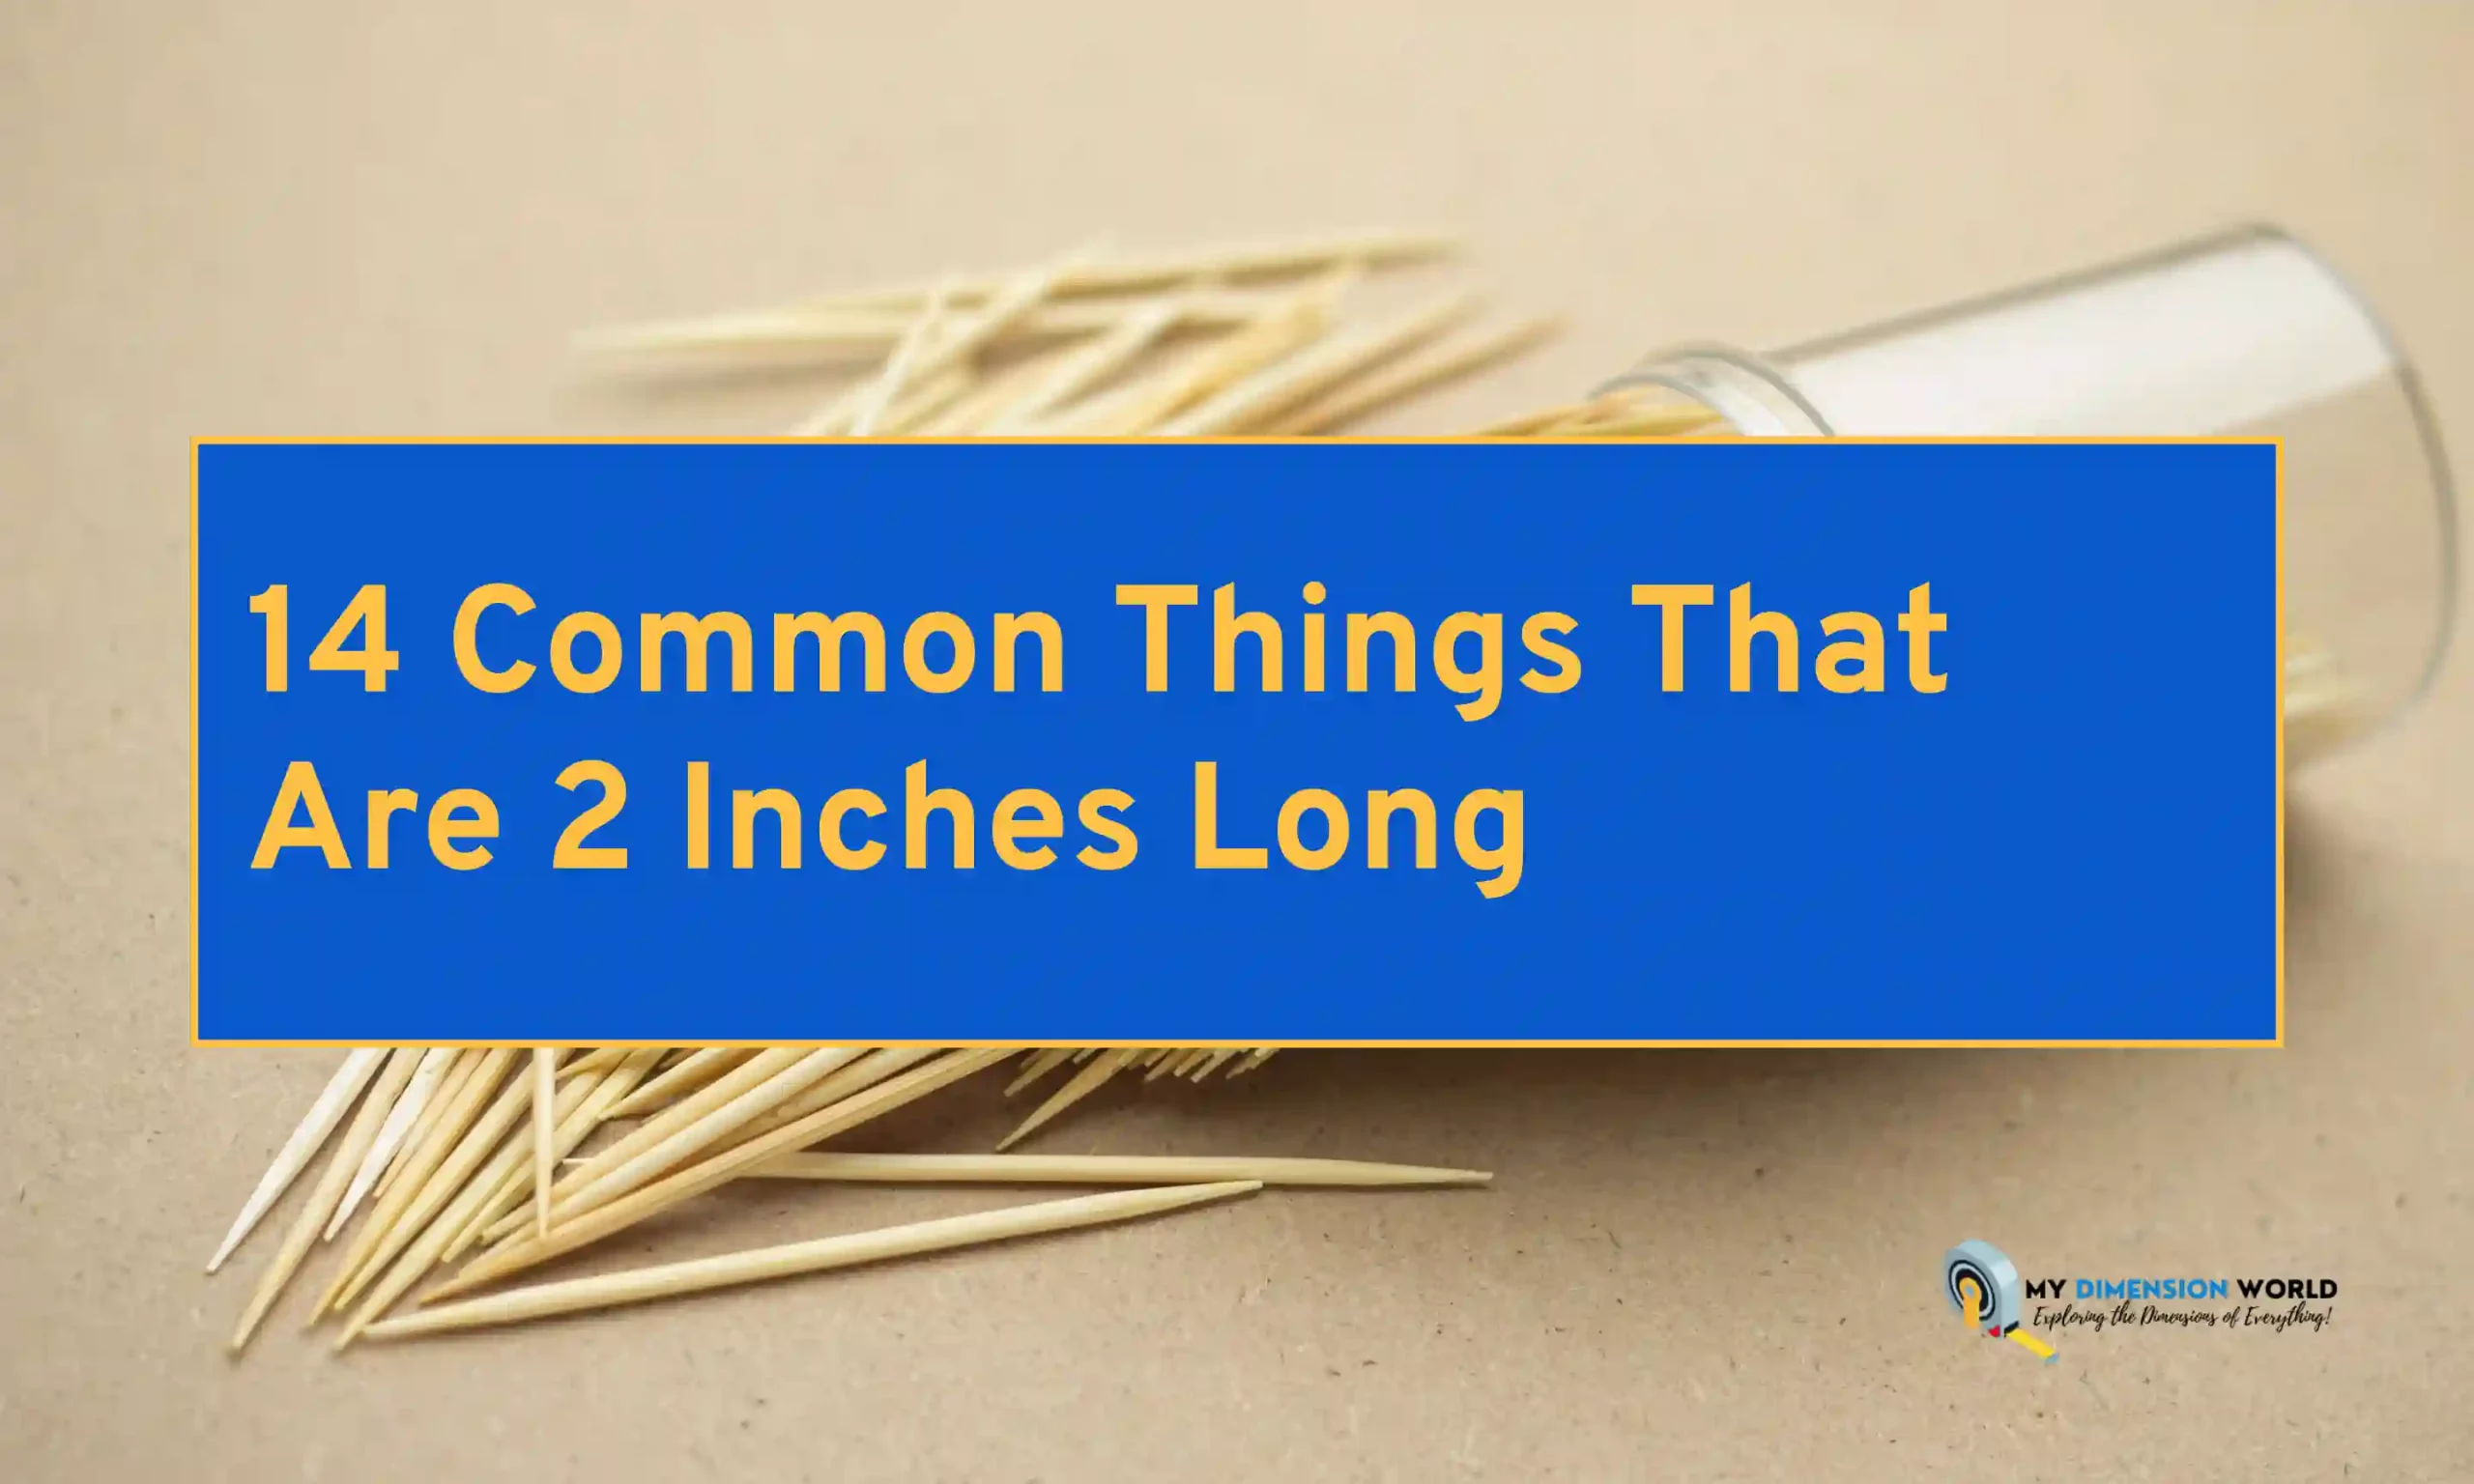 14 Common Things That Are 2 Inches Long